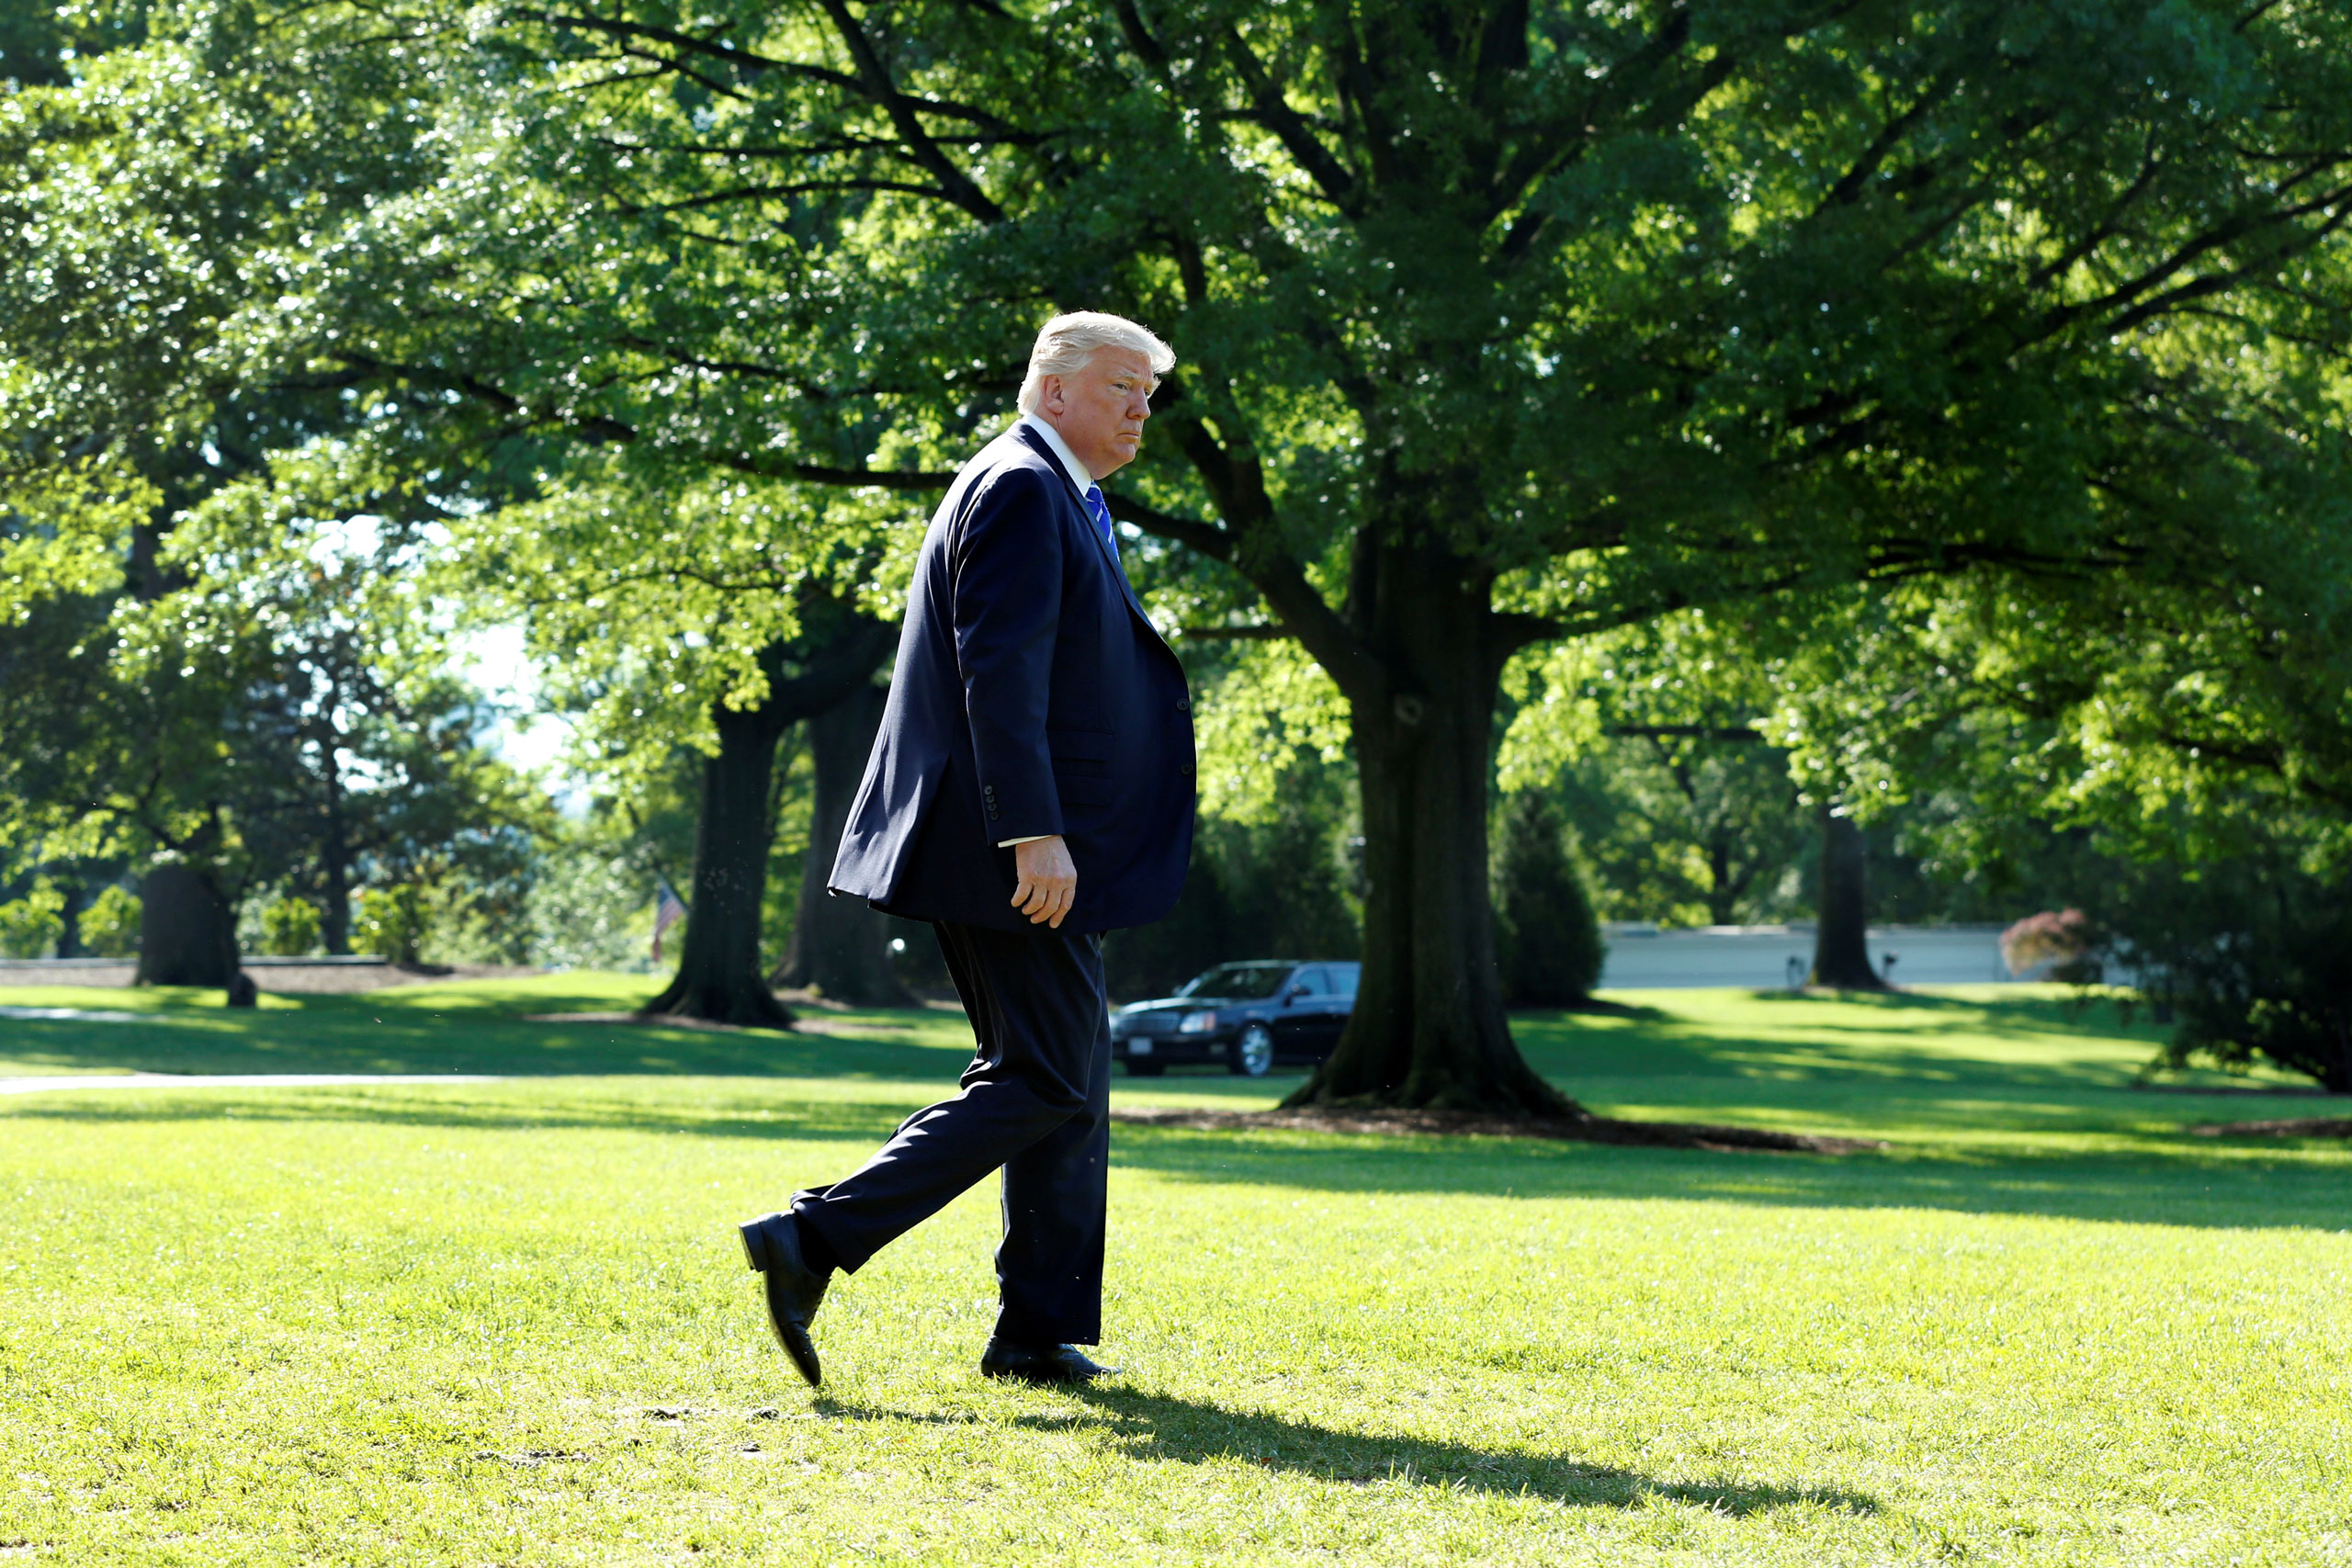 President Donald Trump walks on the South Lawn of the White House in Washington, before his departure to Groton, Connecticut, May 17, 2017. (Yuri Gripas&mdash;Reuters)